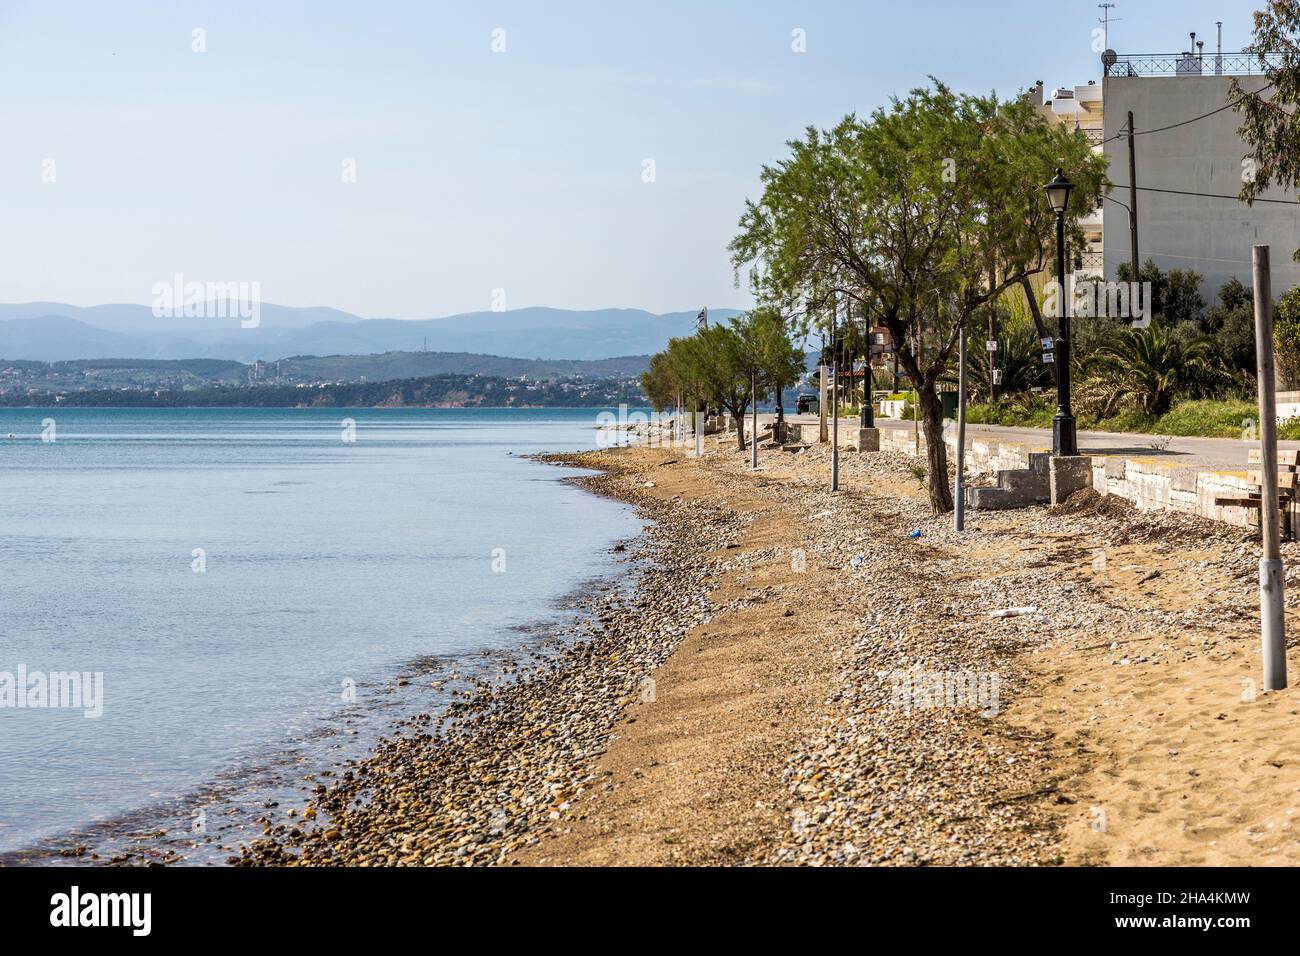 a sandy beach somewhere in greece. some rusty pegs coming out of the sand and enjoying the view sto the ocean and the mountains in the back. trees are also in the picture. Stock Photo